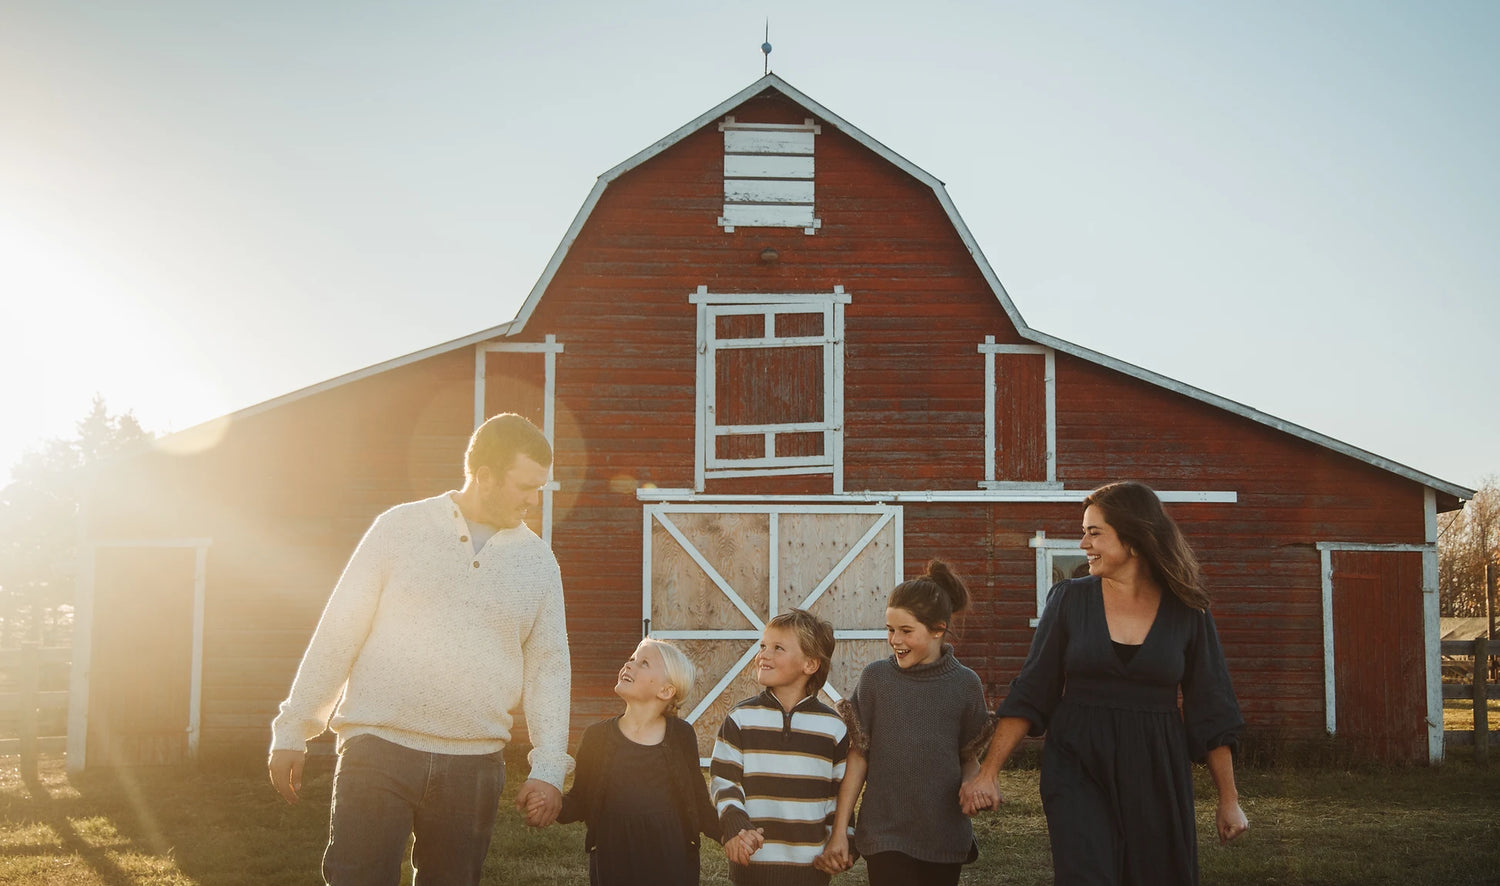 In the sunset, Sarah with her husband and three kids holding hands in front of their big red barn with white trim. 